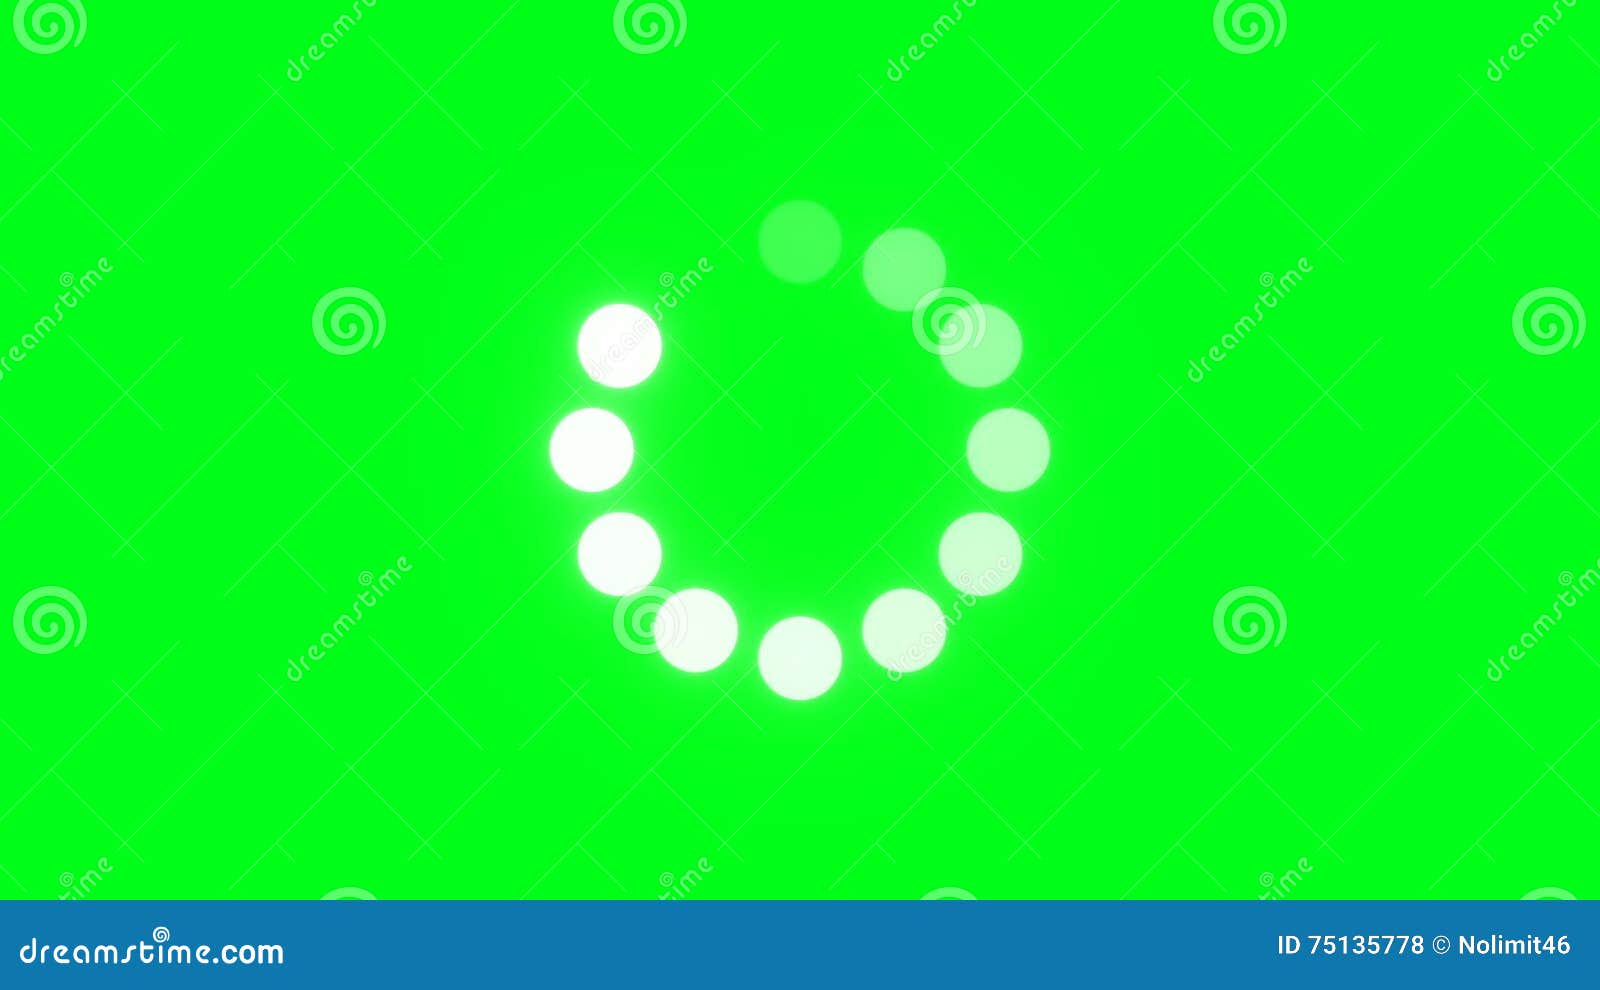 Circle Loading Animation stock footage. Video of interface - 75135778